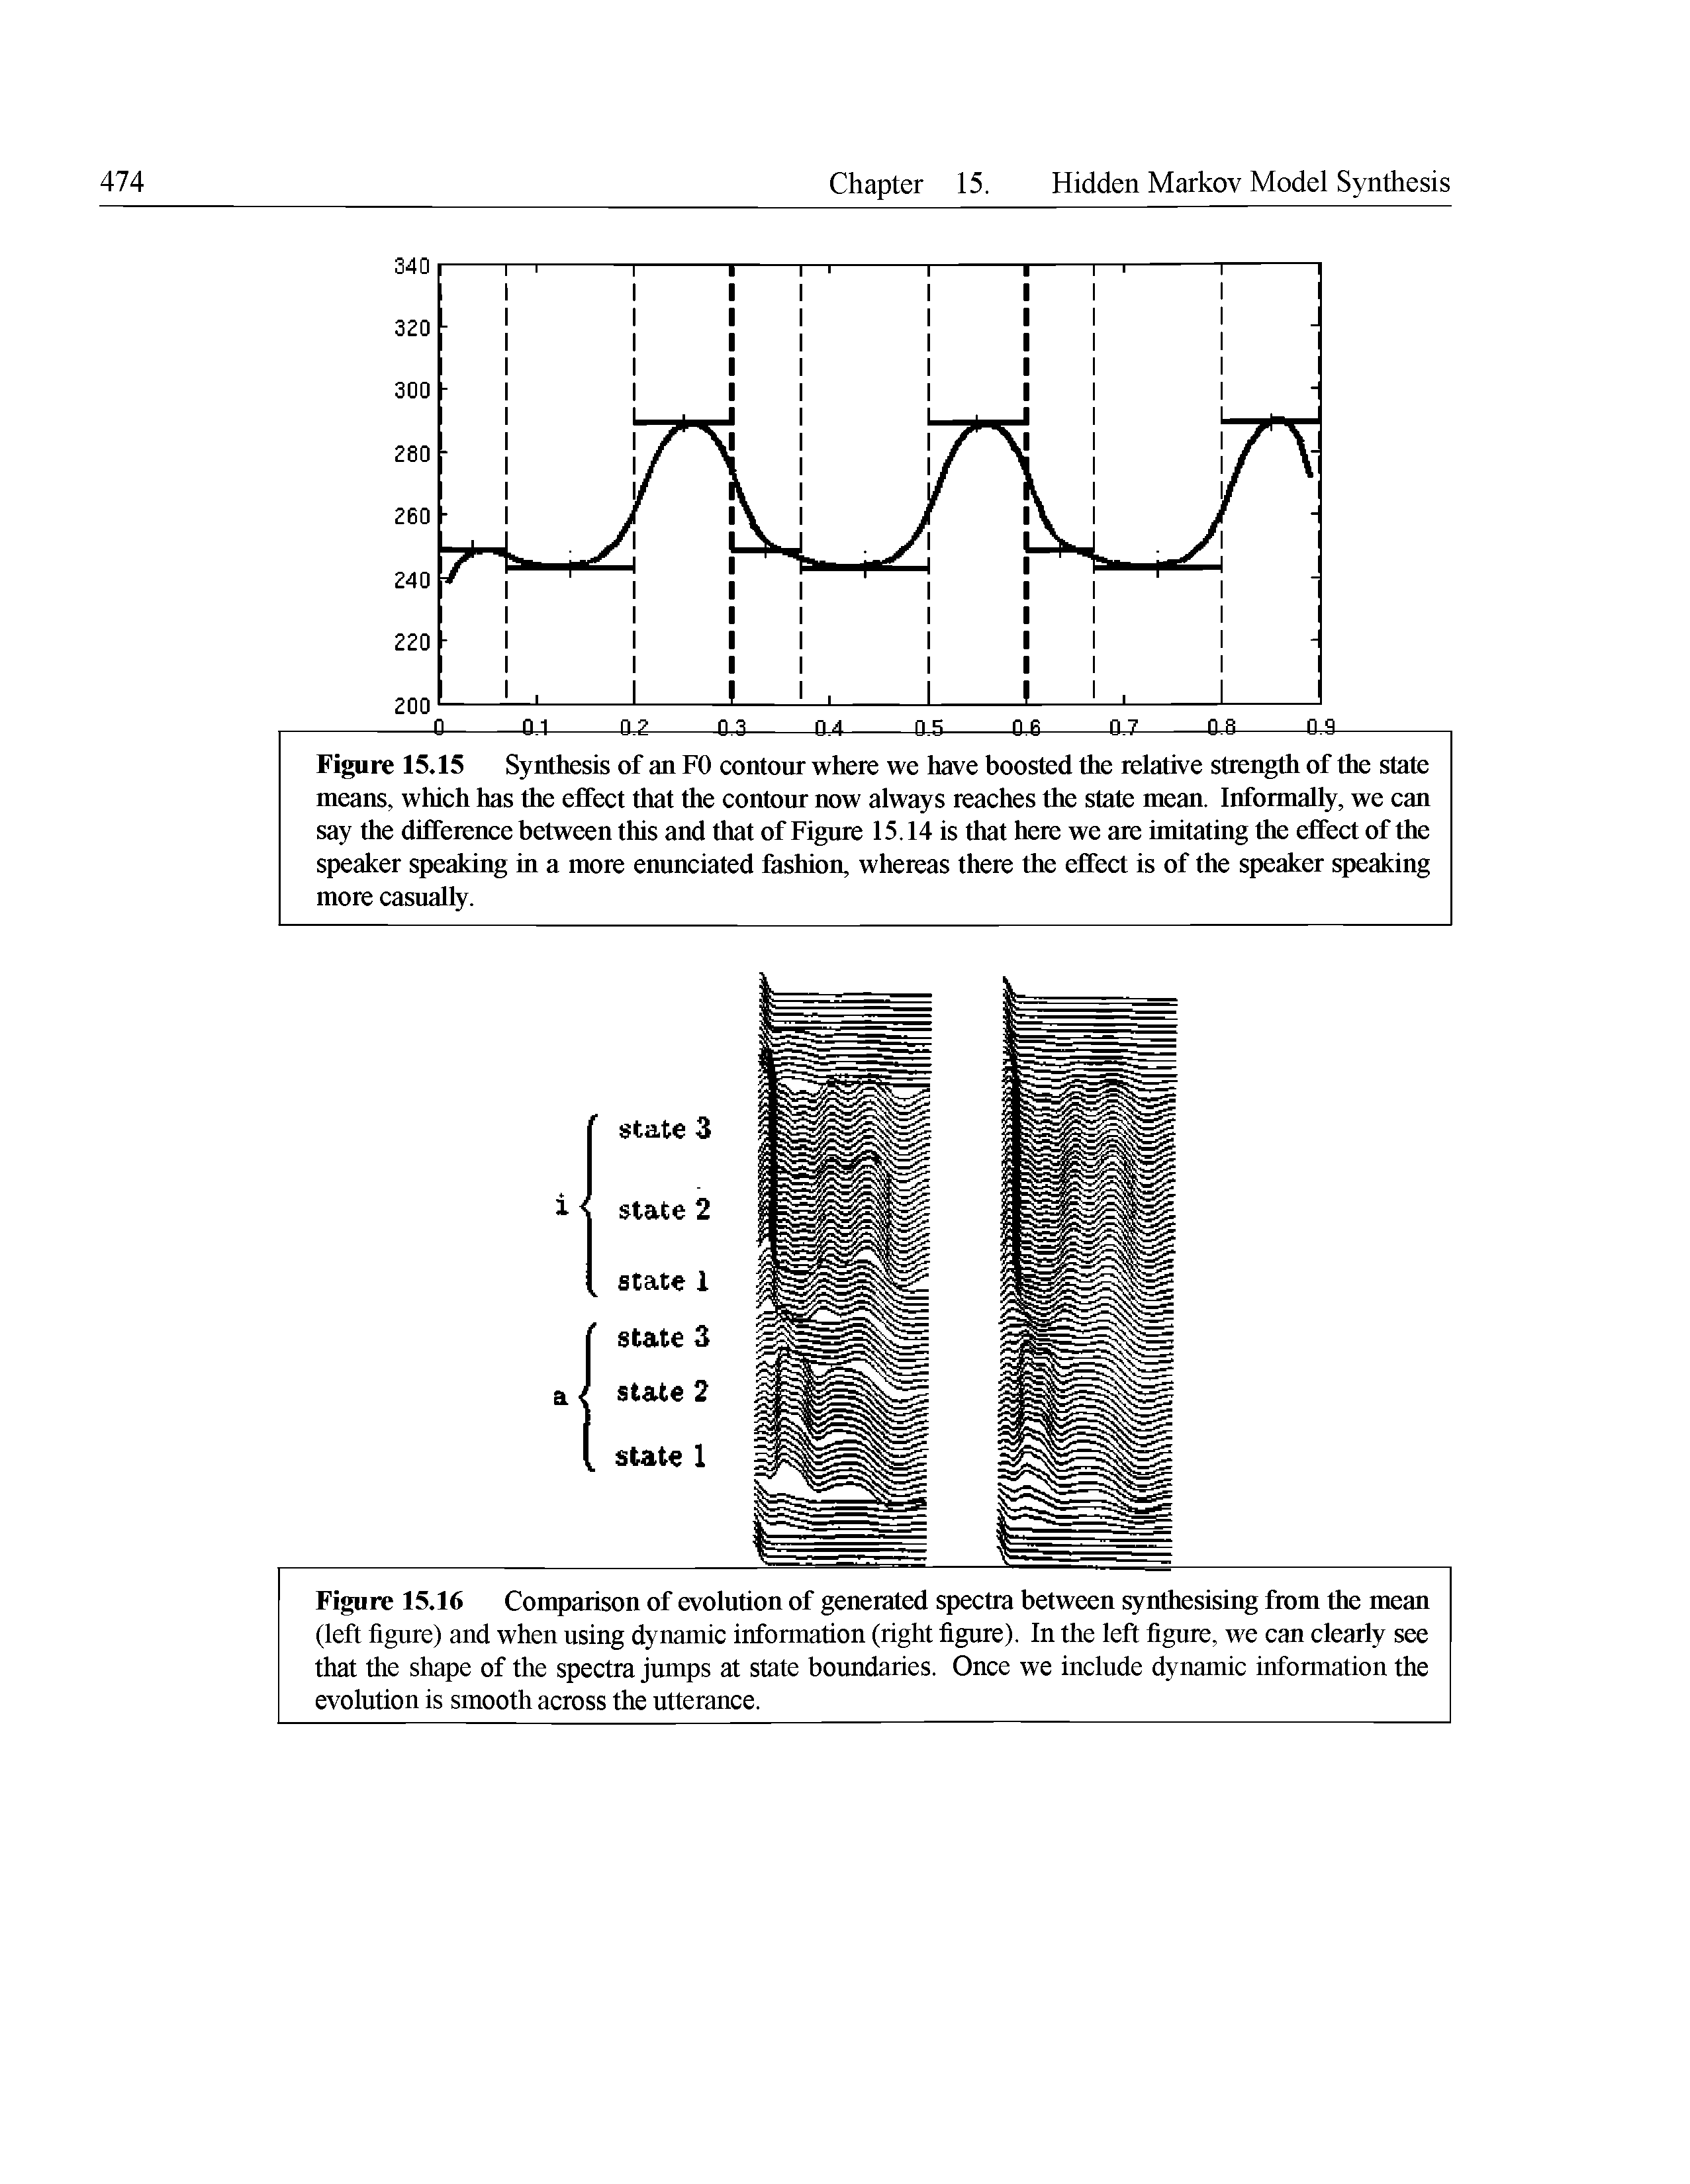 Figure 15.16 Comparison of evolution of generated spectra between synthesising from the mean (left figure) and when using dynamic information (right figure). In the left figure, we can clearly see that the shape of the spectra jumps at state boundaries. Once we include dynamic information the evolution is smooth across the utterance.